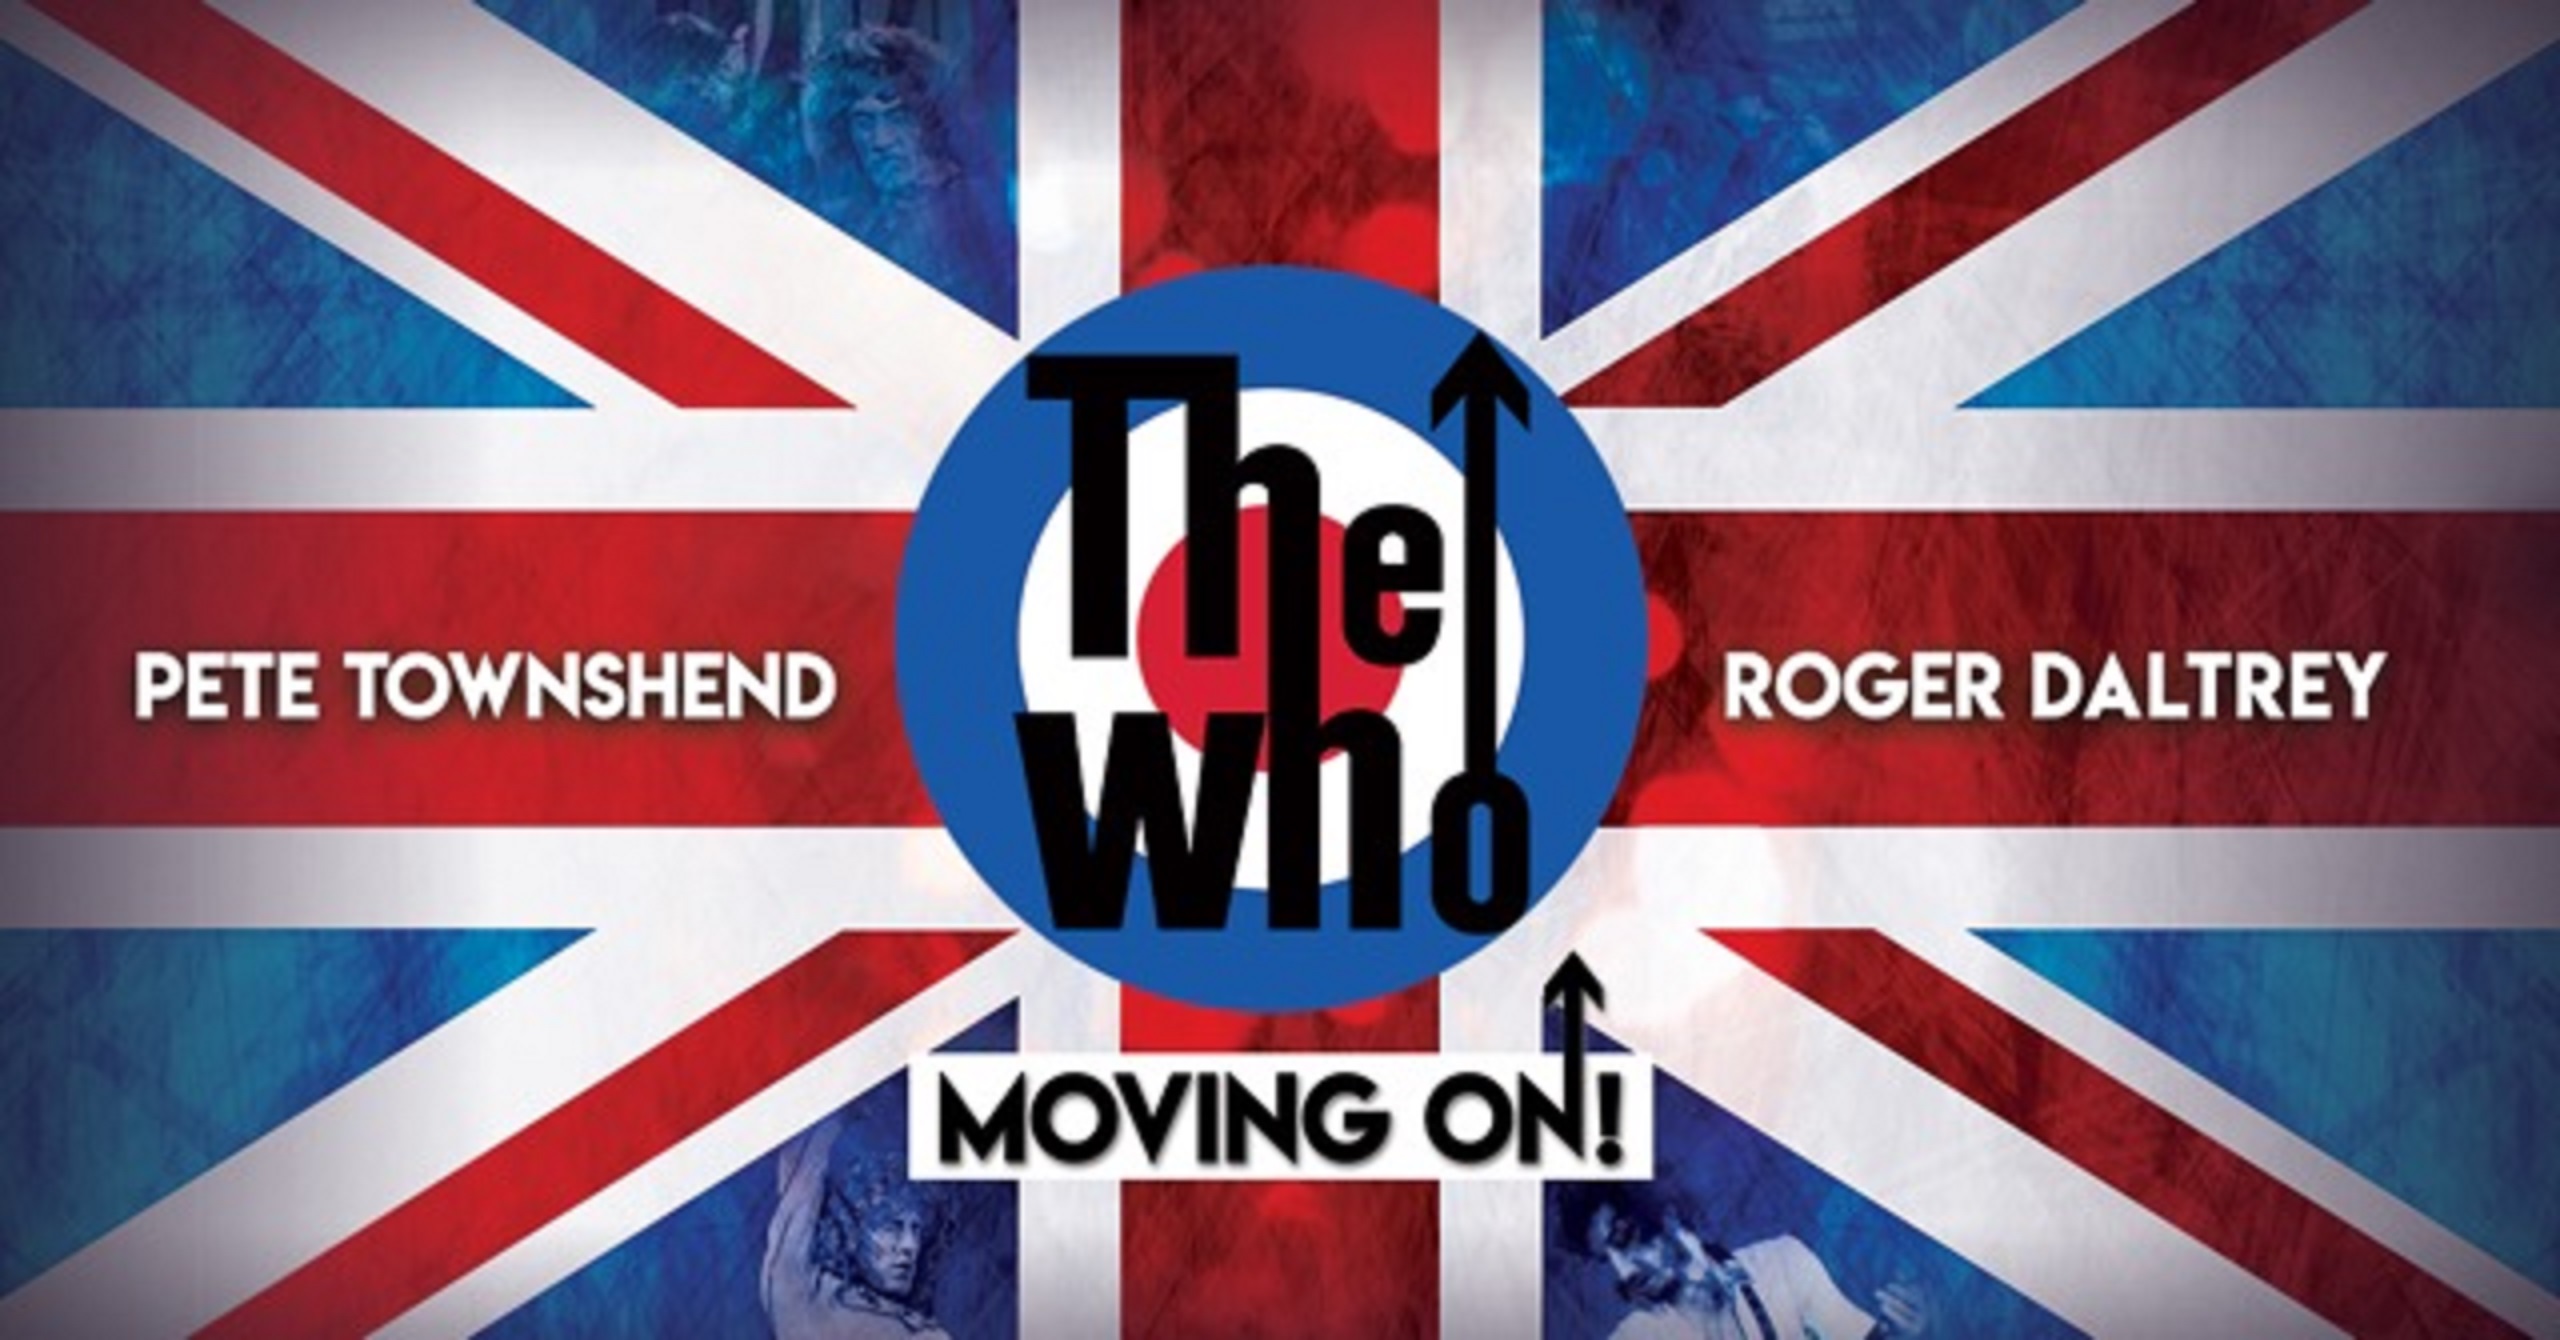 THE WHO announces 2019 MOVING ON! TOUR